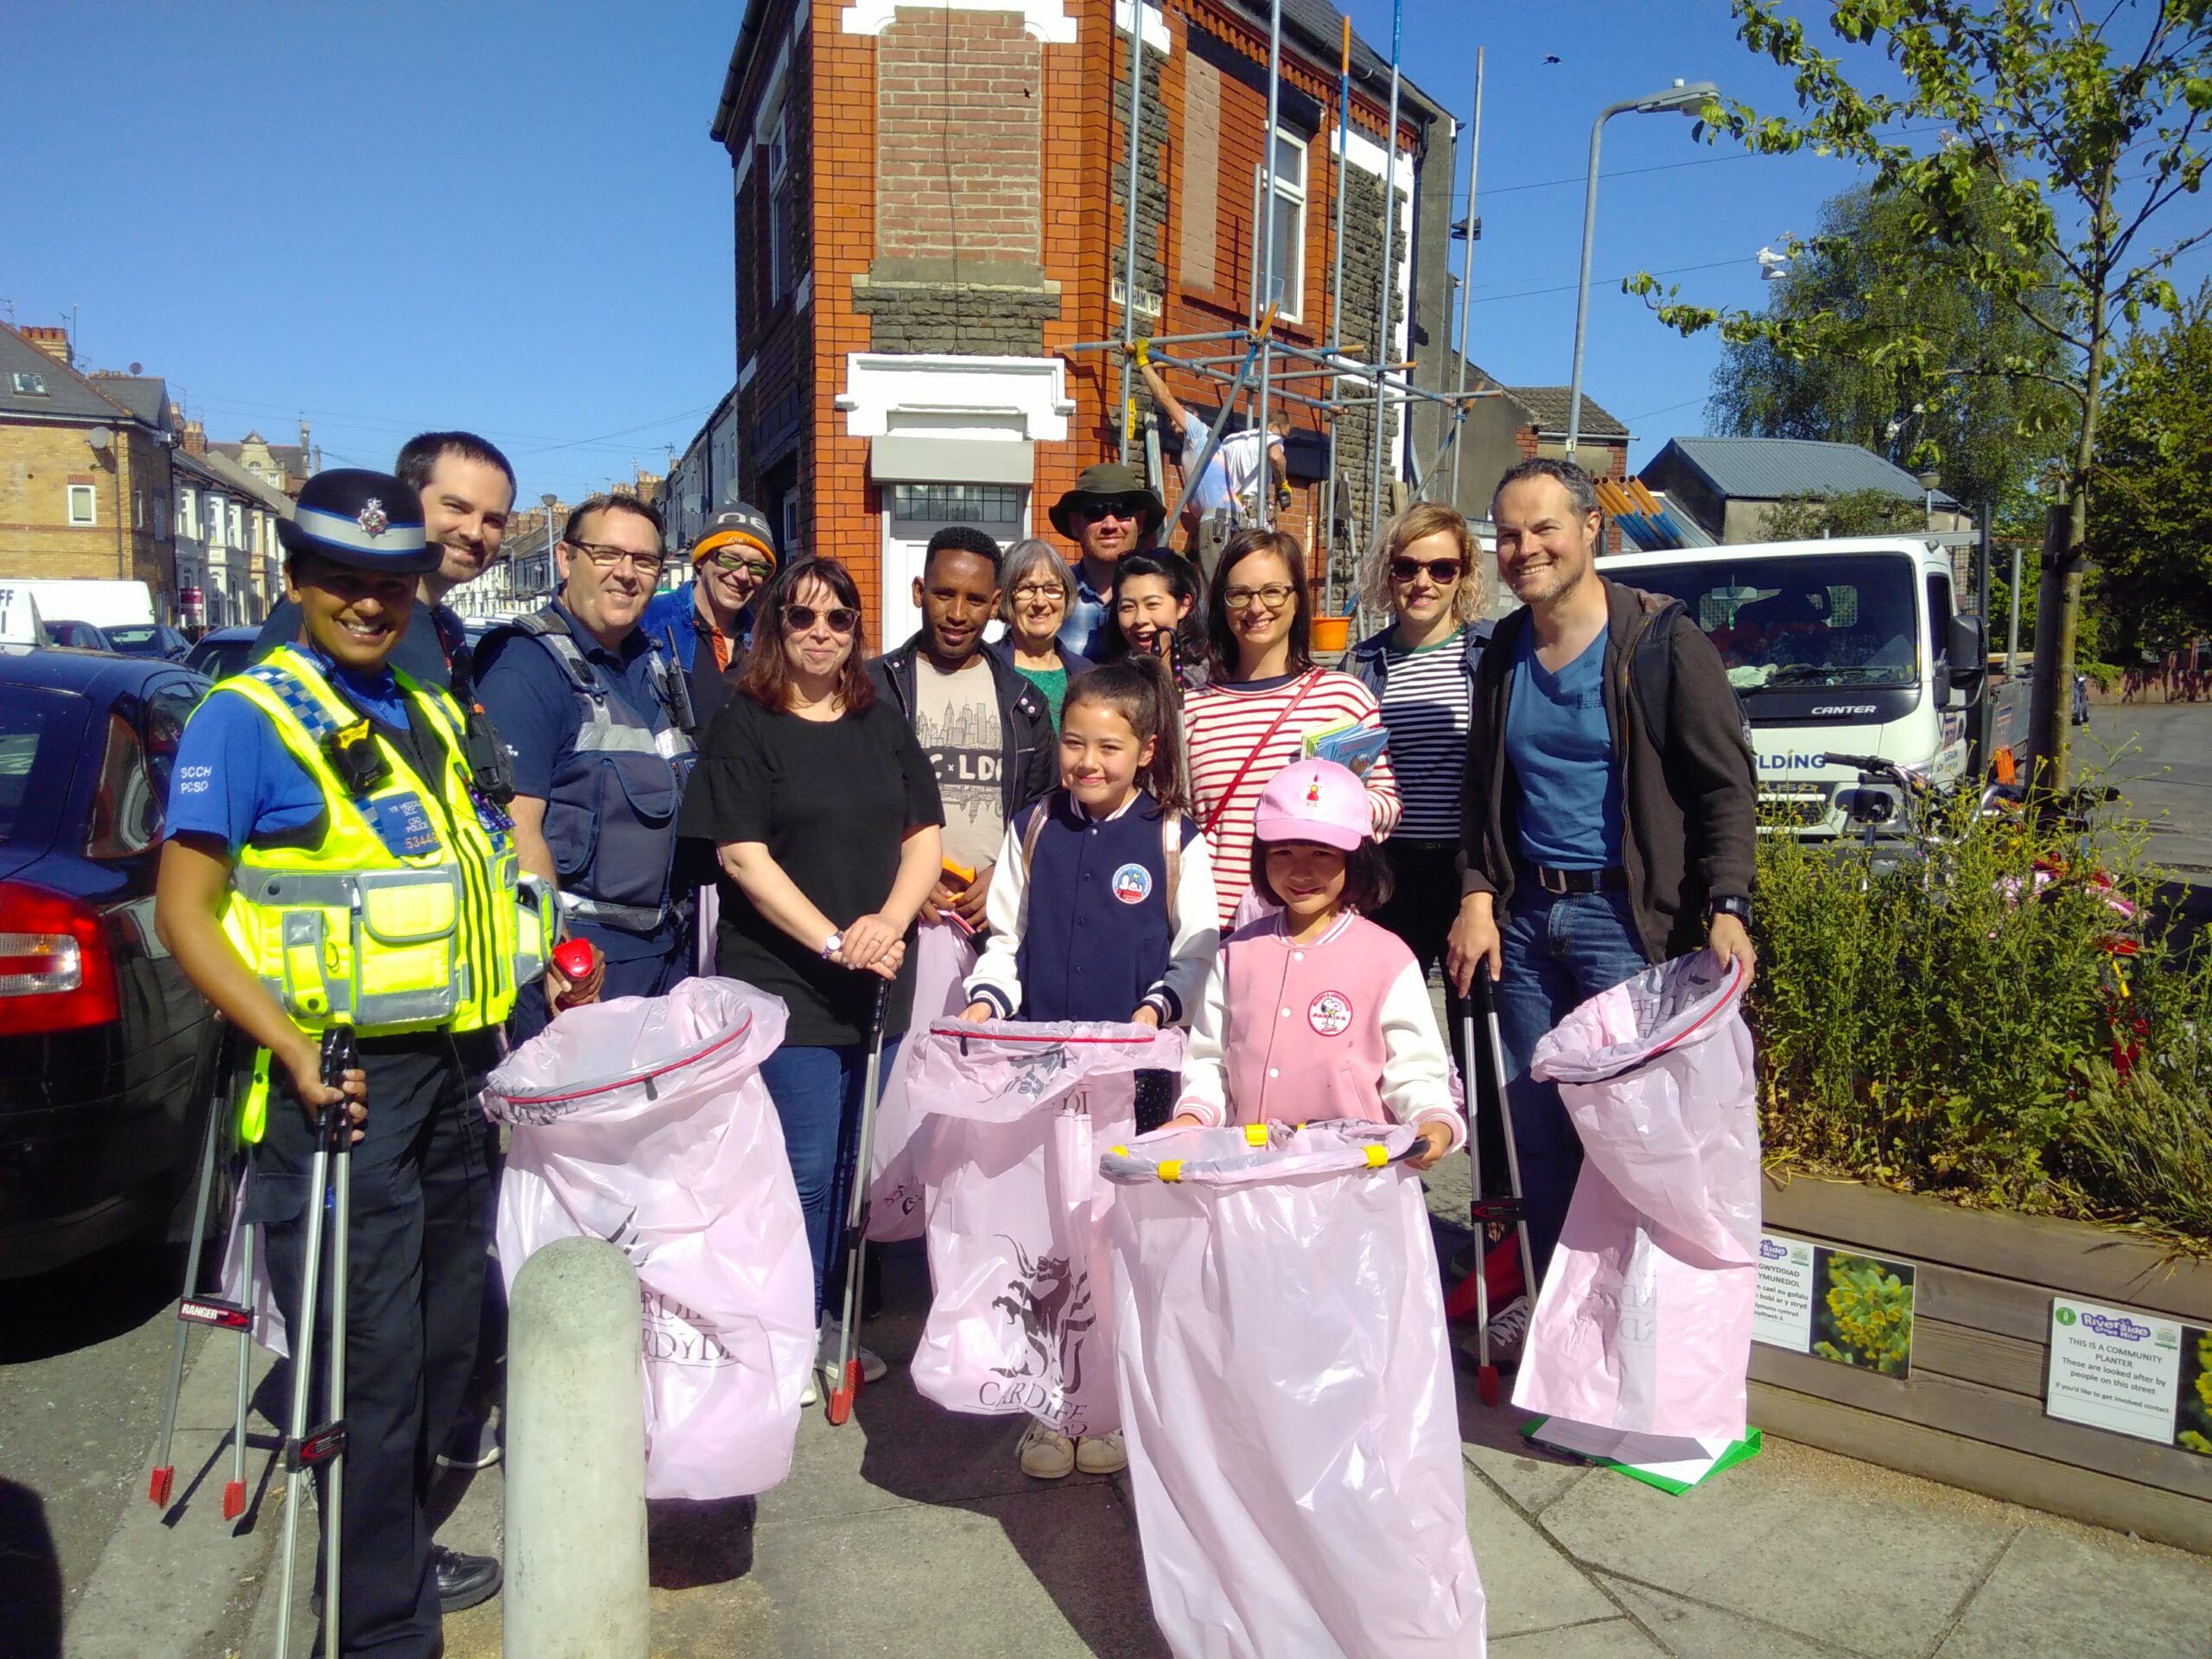 Becca's group, Keep Riverside Tidy, involves the police and local councillors, as well as residents. 